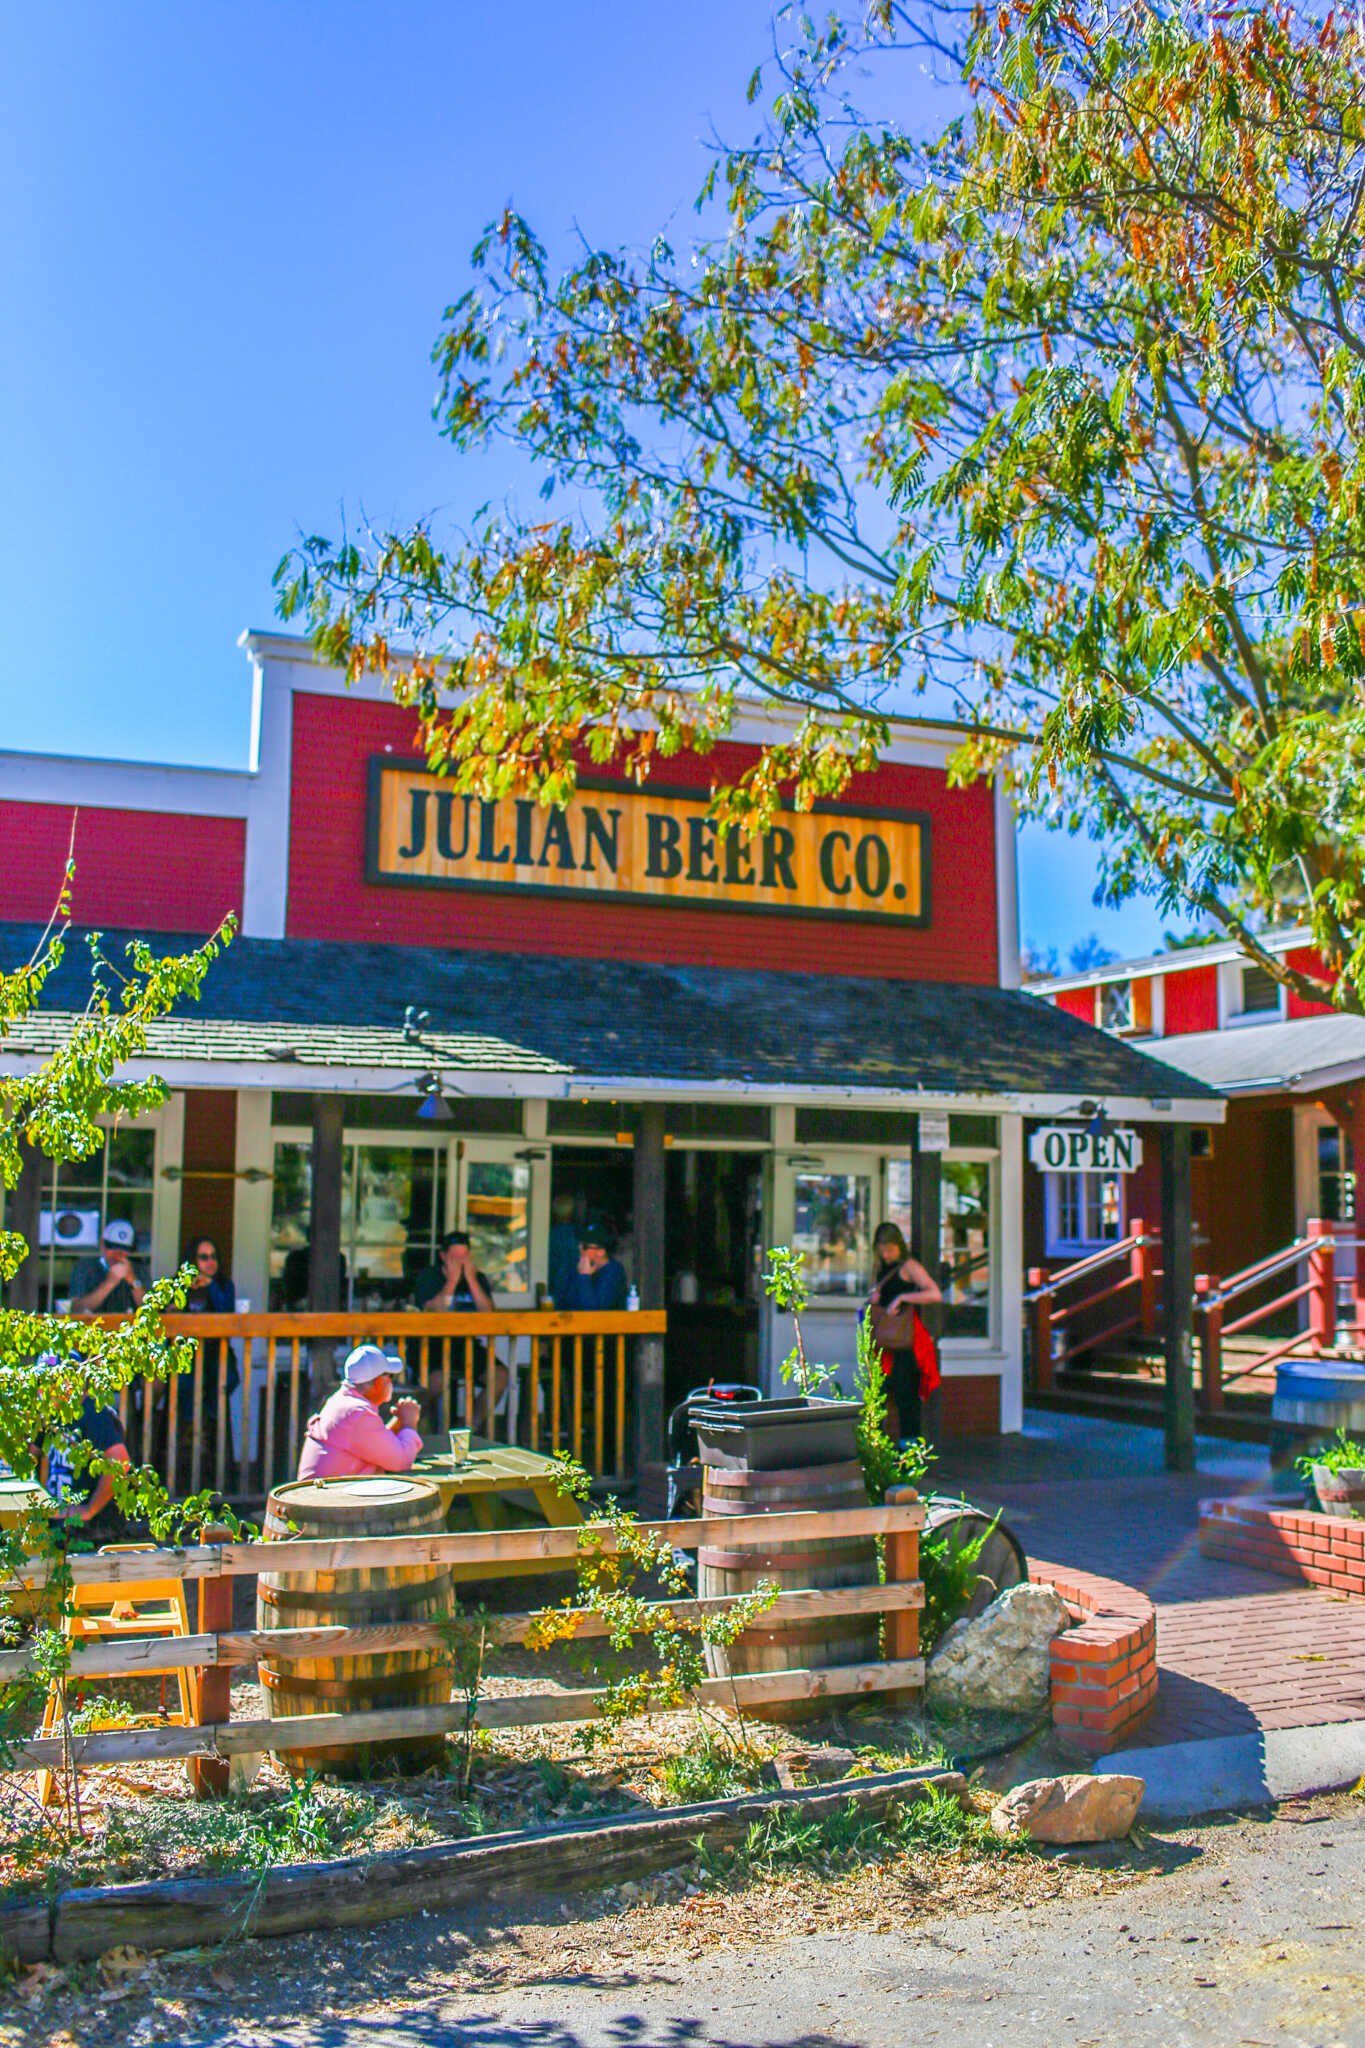 The Complete Travel Guide to Julian, California - Julian Beer Company restaurant.